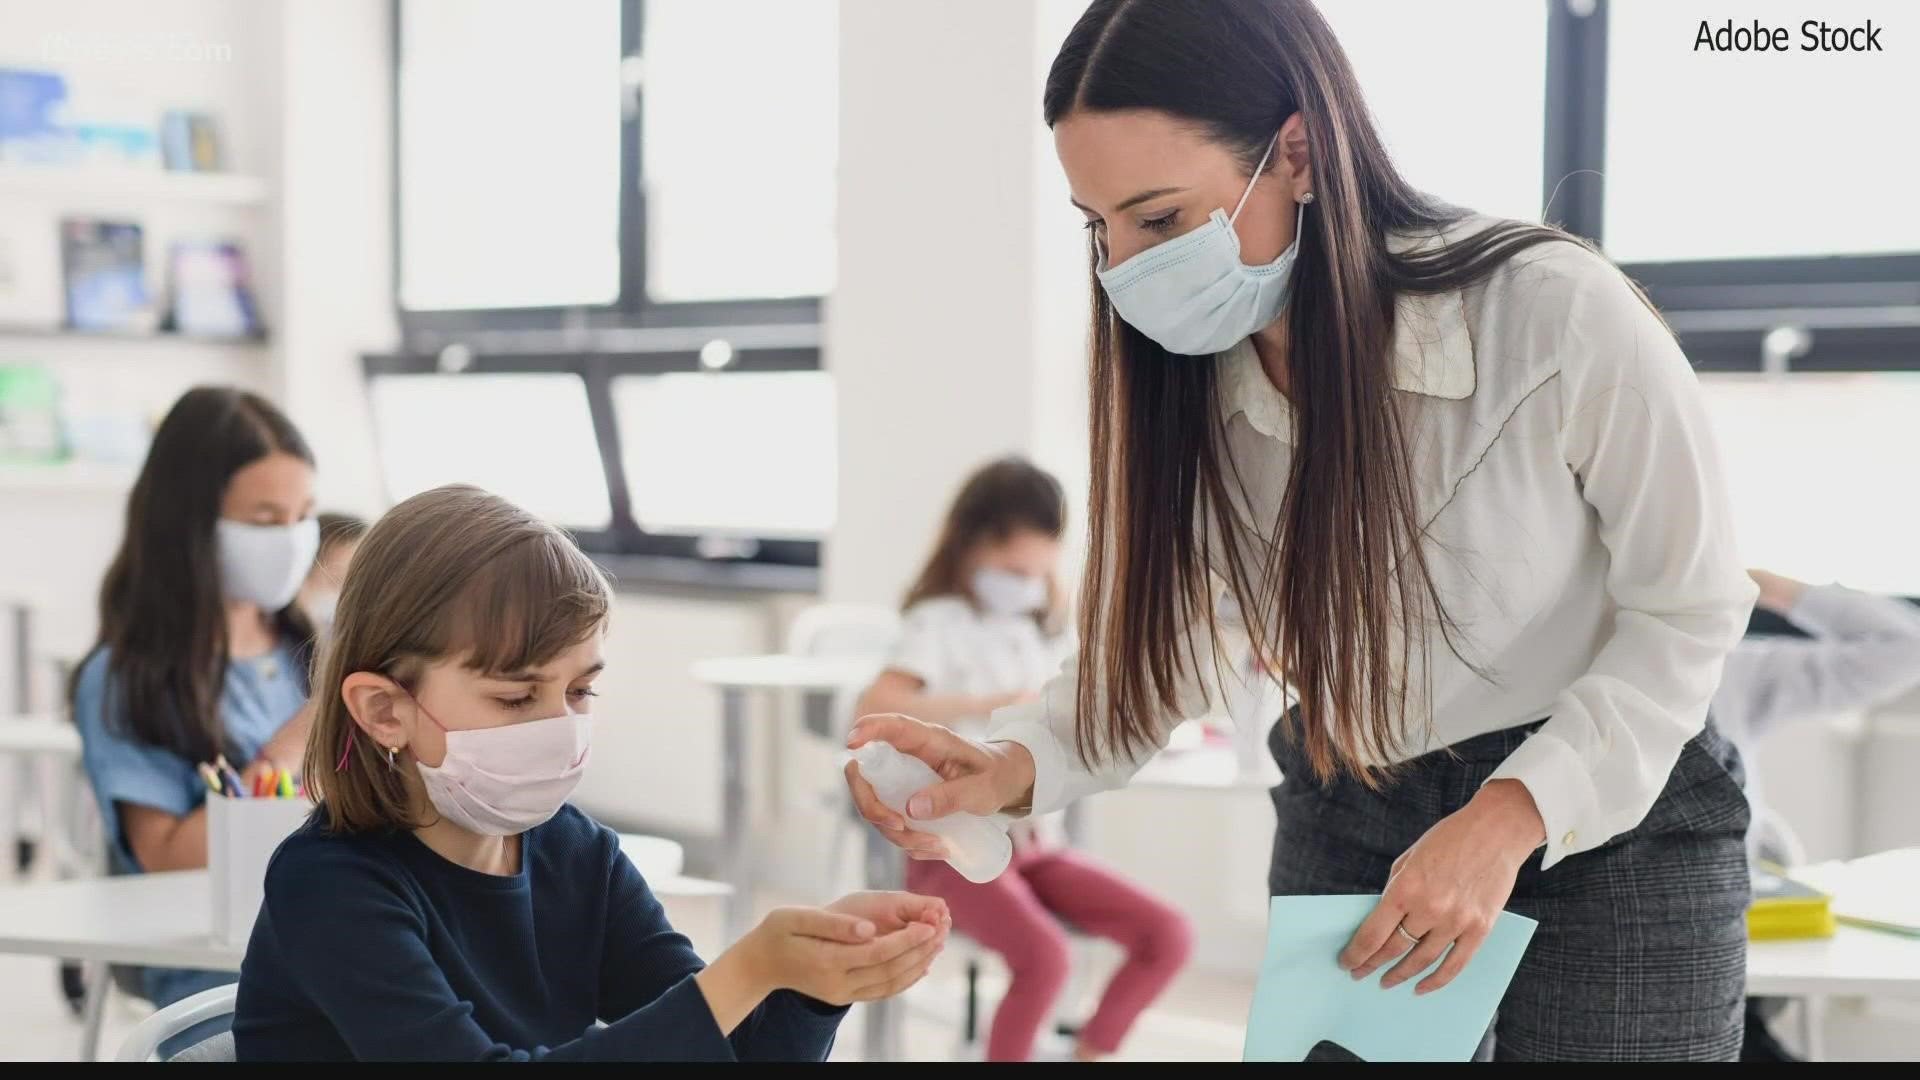 A Maricopa County judge struck down Arizona's ban on face-mask mandates by school districts as unconstitutional, just two days before the ban was to become law.